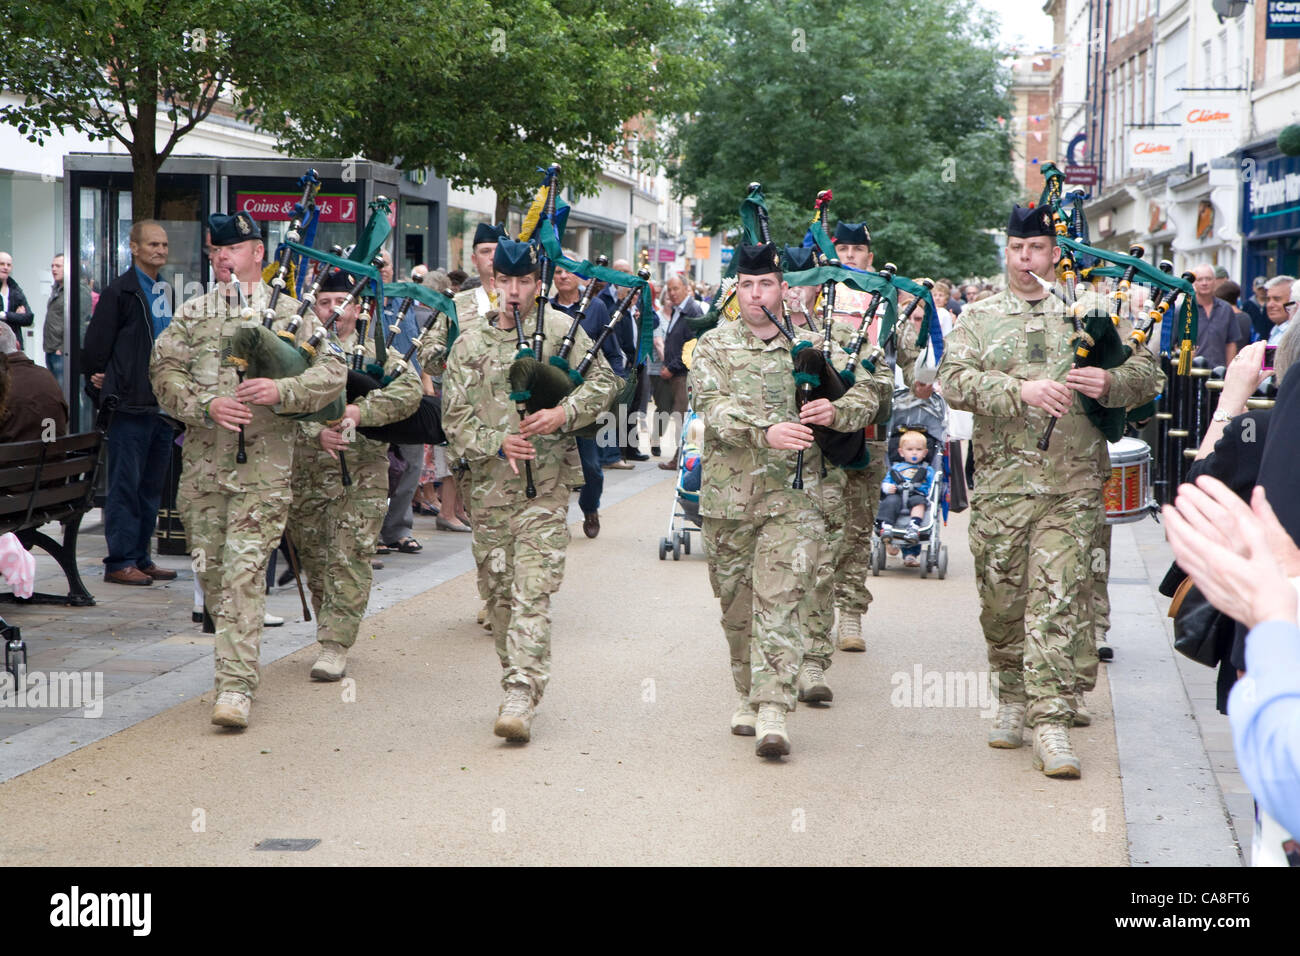 Worcester, England, UK. Wednesday 27th June 2012.  Soldiers from 2nd Battalion Mercian Regiment, Grenadier Guards, Queen's Royal Hussars and members of the Royal British legion, parade through the streets of Worcester. Seven soldiers from the city were also given their service medals. Stock Photo